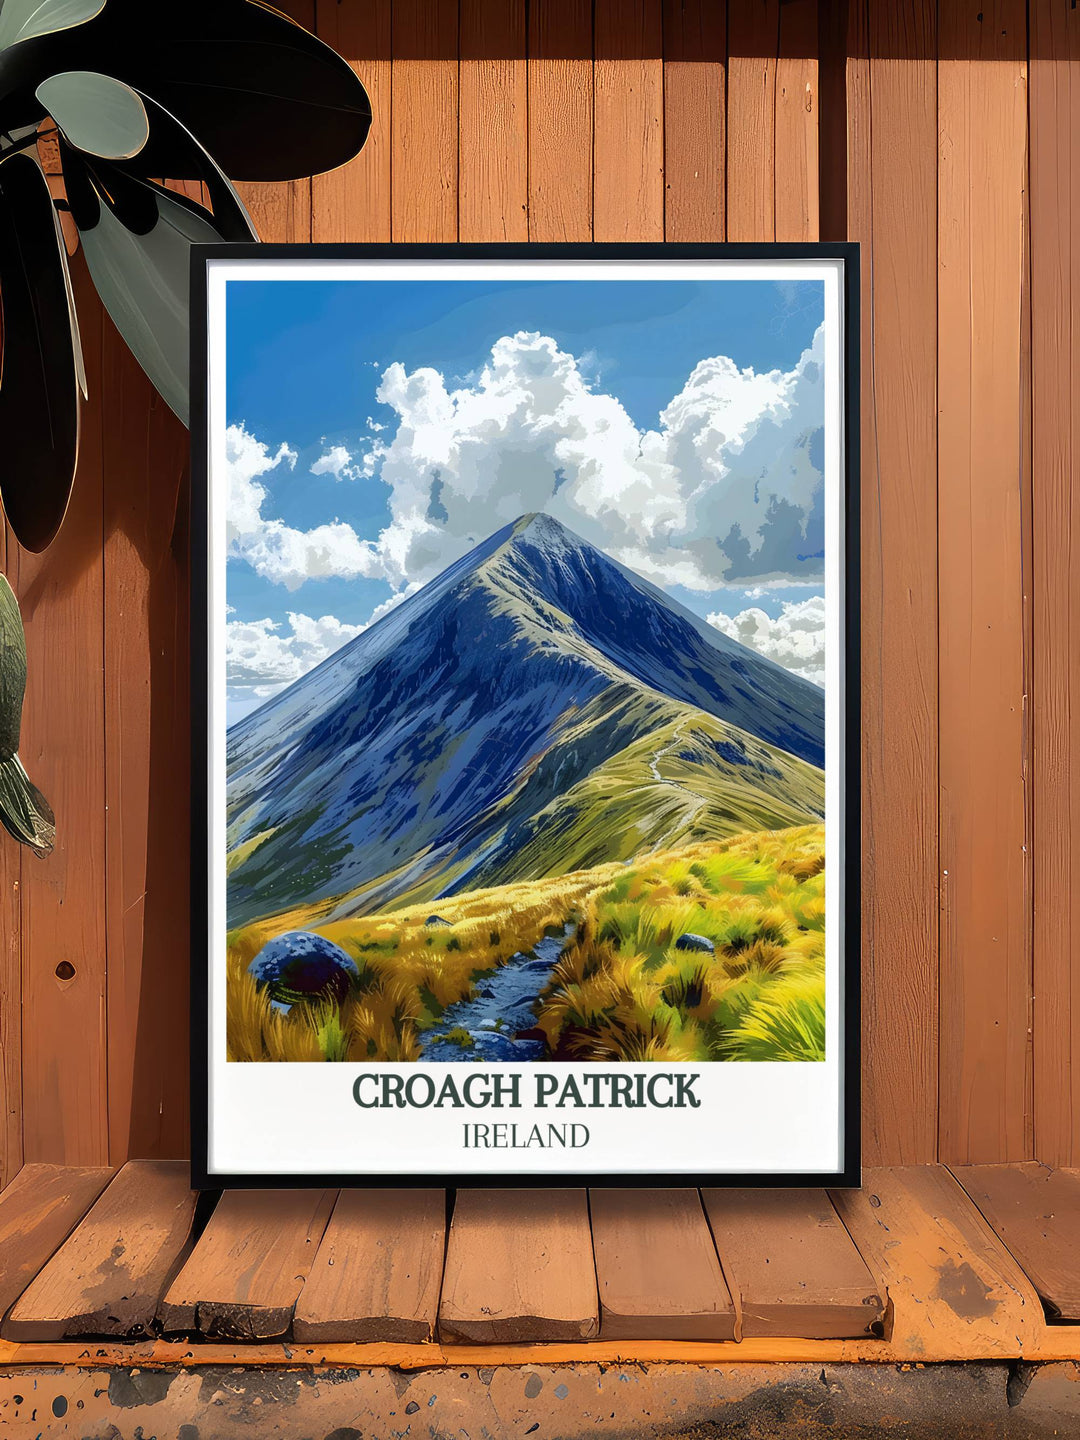 Experience the spiritual journey of the Croagh Patrick Trail with this travel poster depicting the majestic mountain and the historic Croagh Patrick Summit. Ideal for those who appreciate Ireland Catholic themes and Irish wall art.